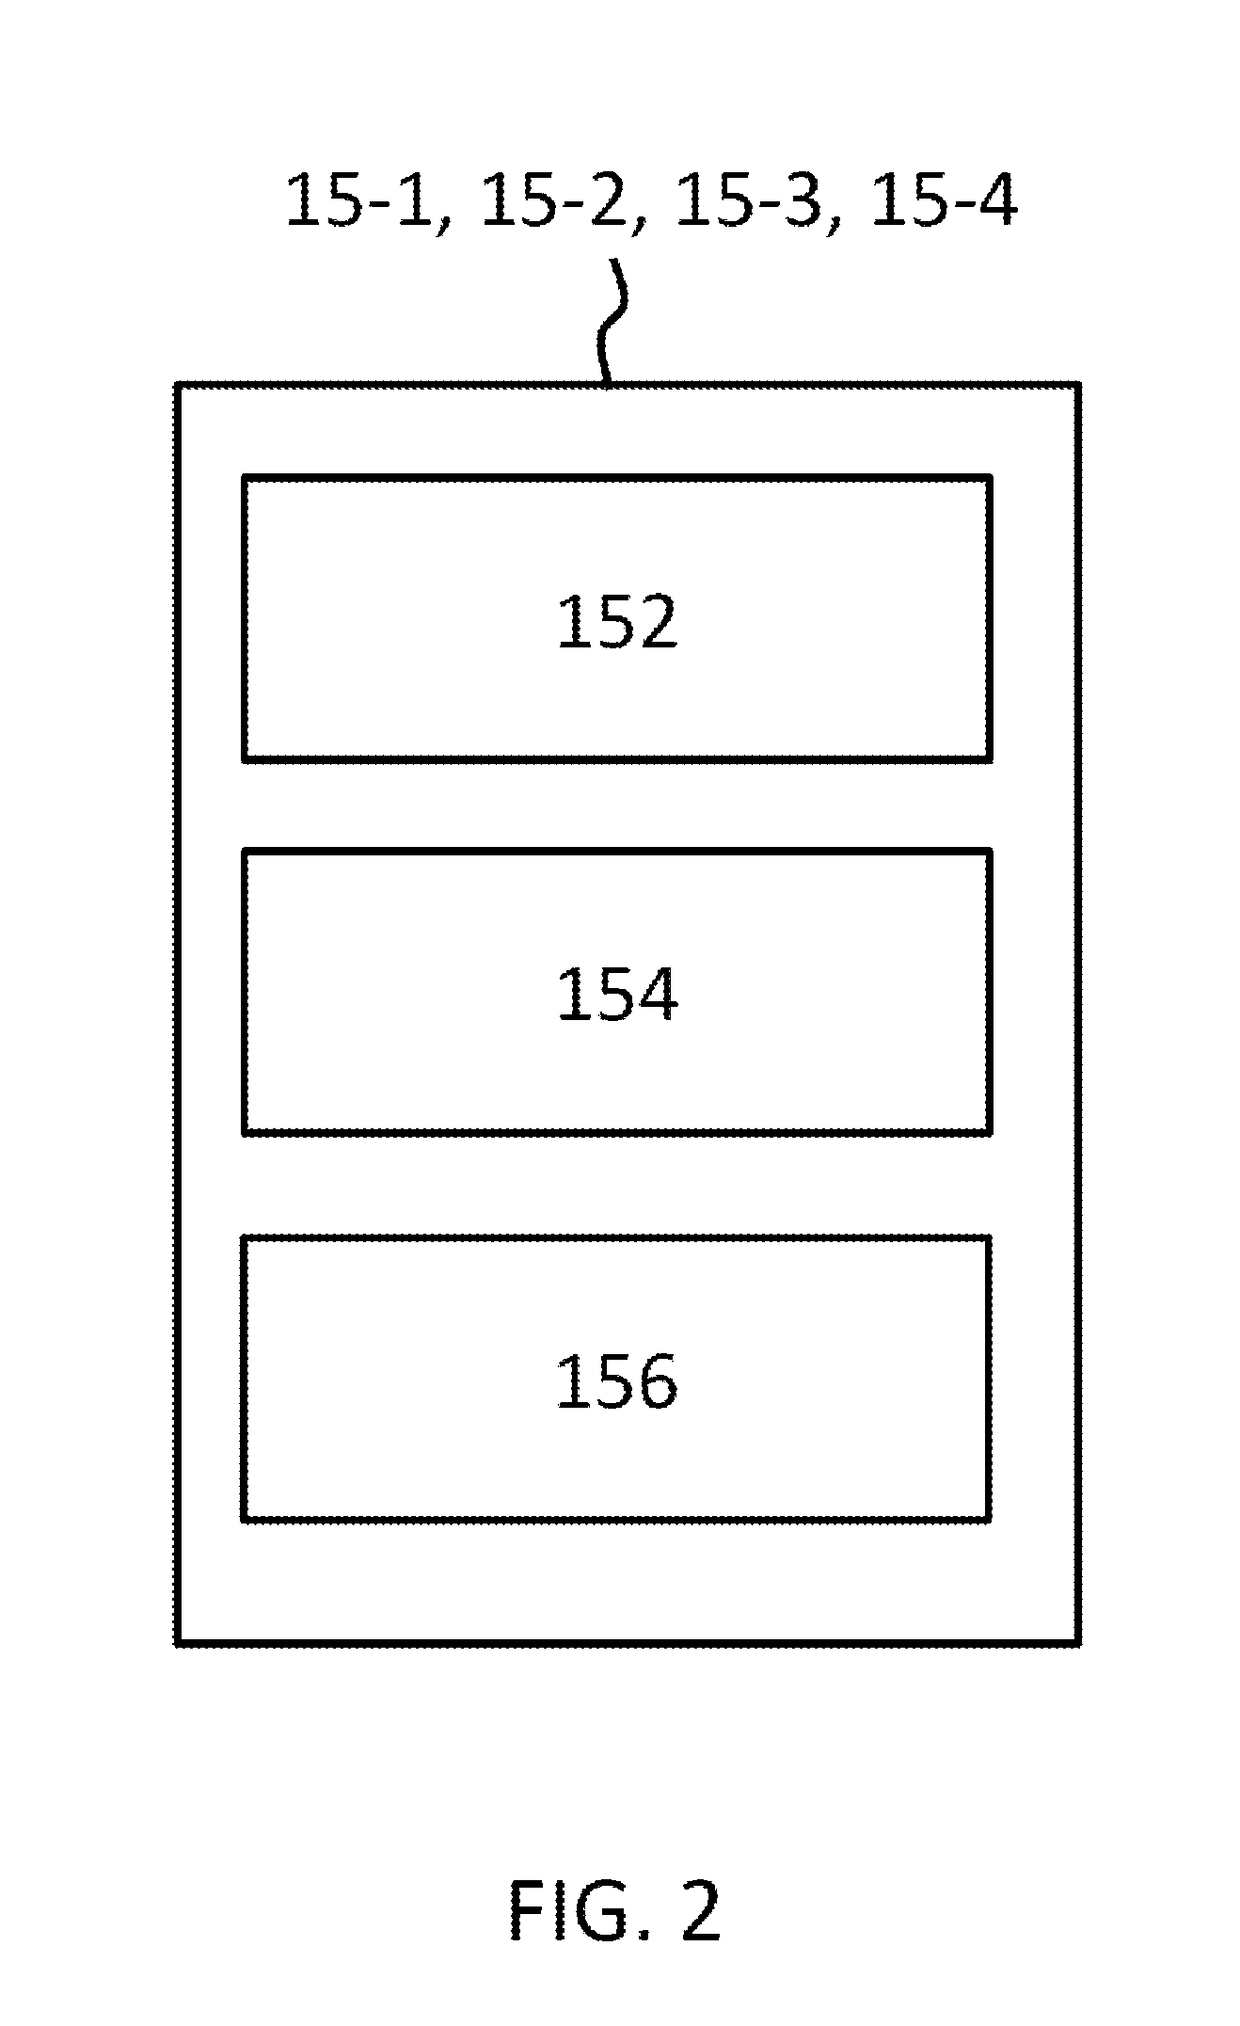 Method and system for selective recall of motor vehicles